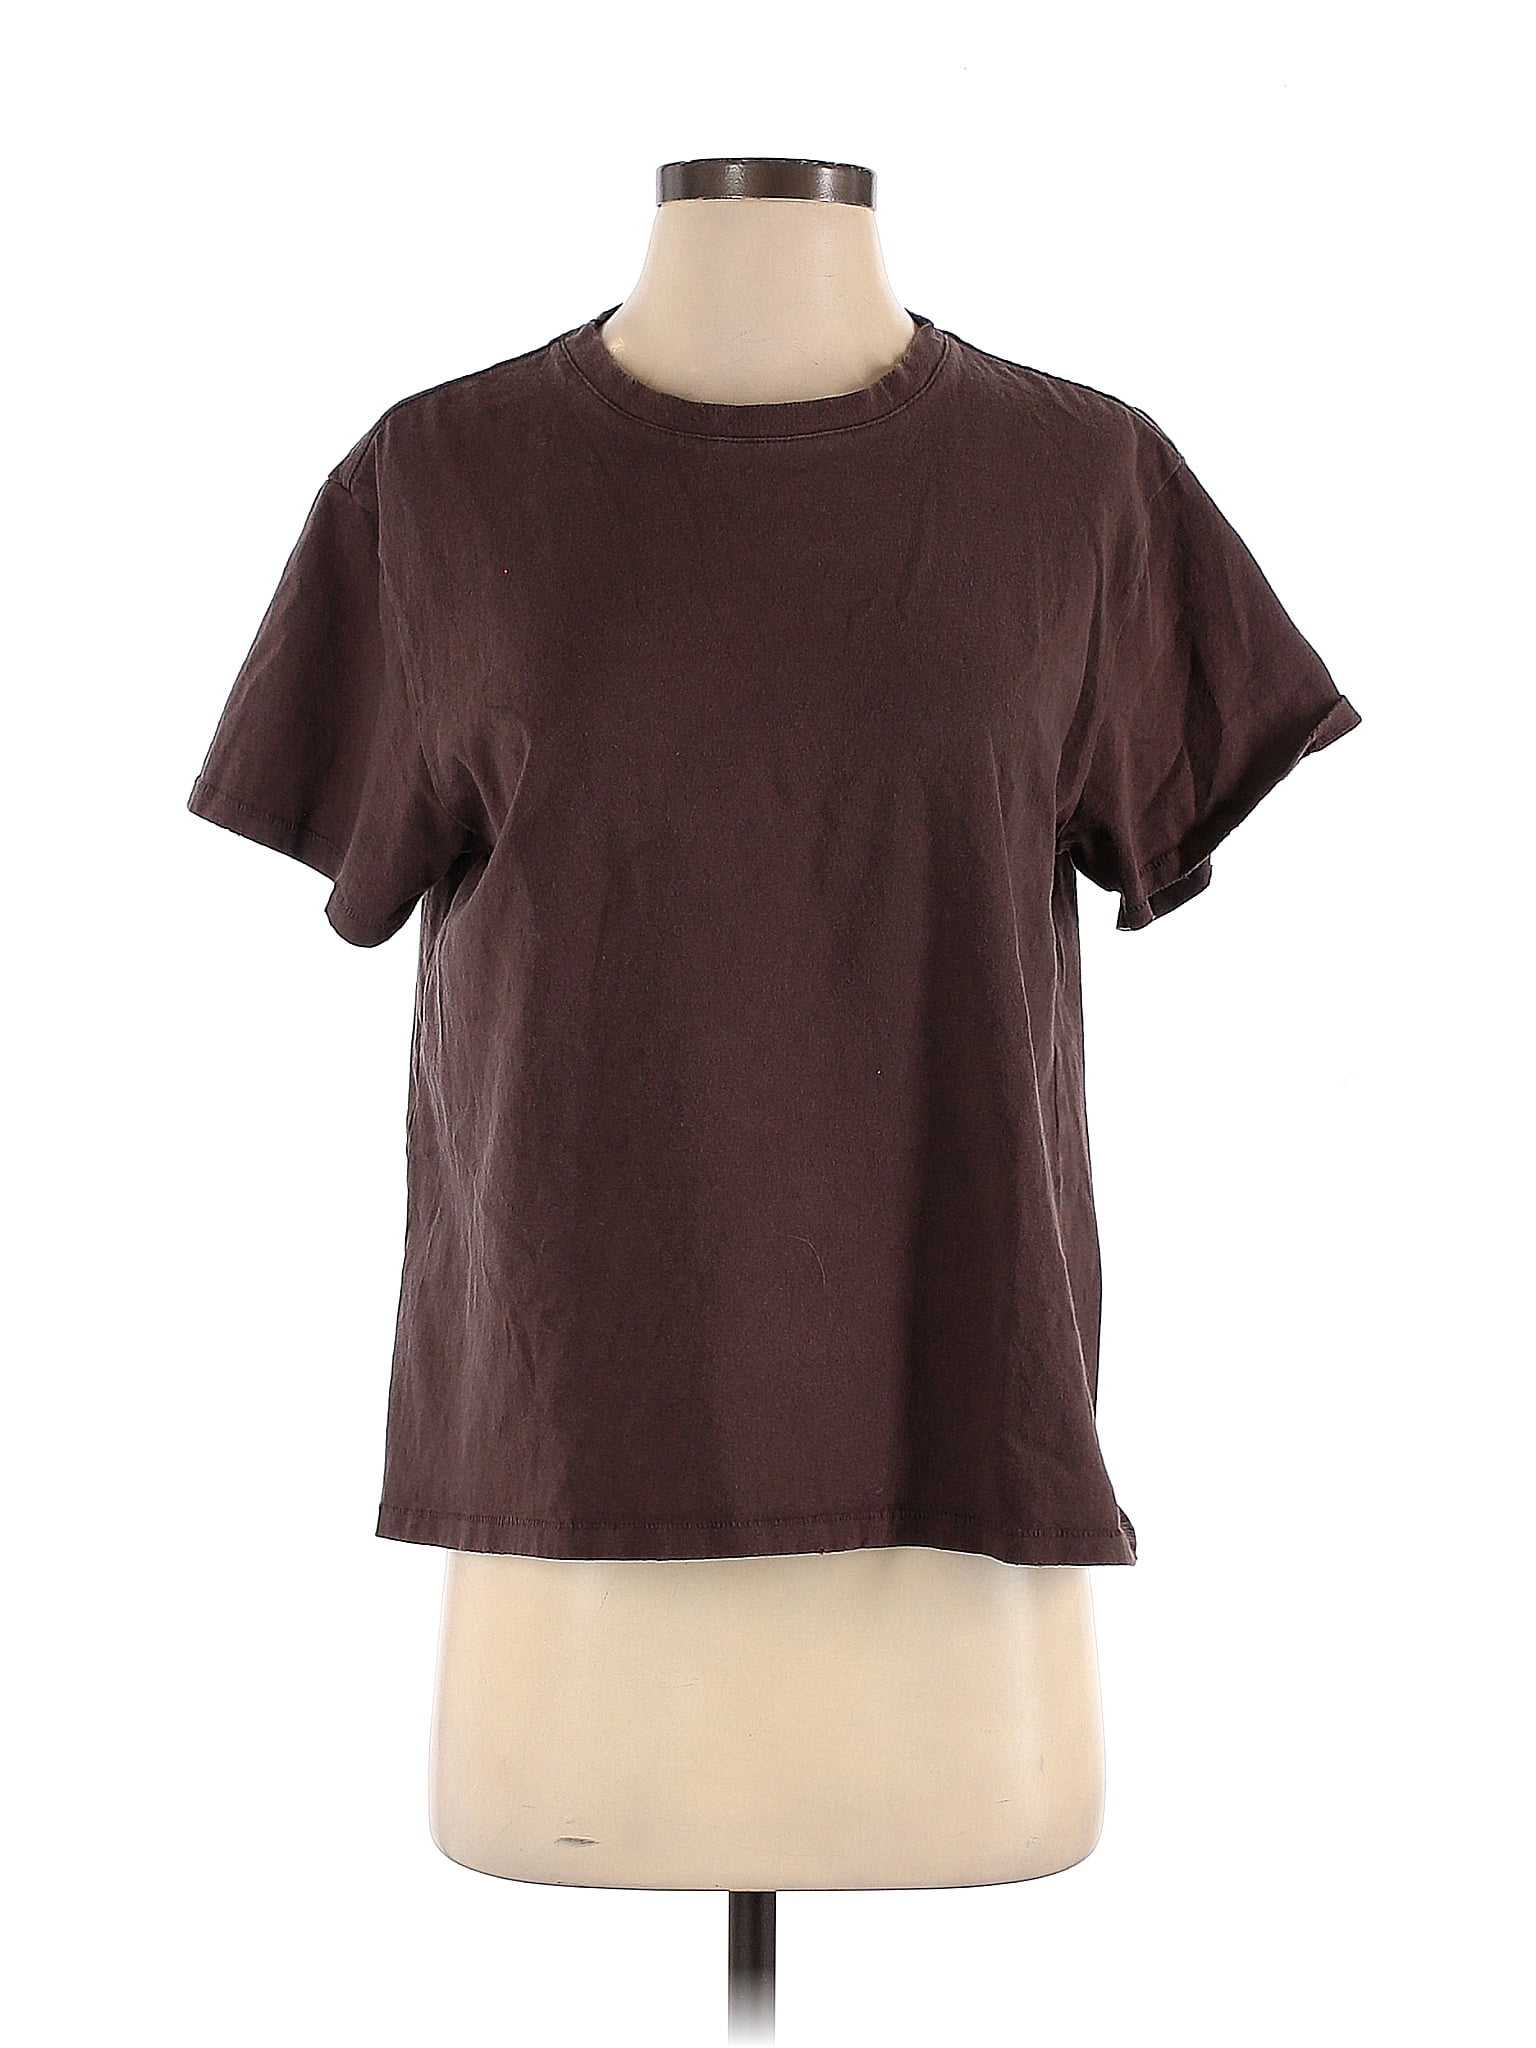 Assorted Brands 100% Cotton Solid Brown Short Sleeve T-Shirt Size S ...